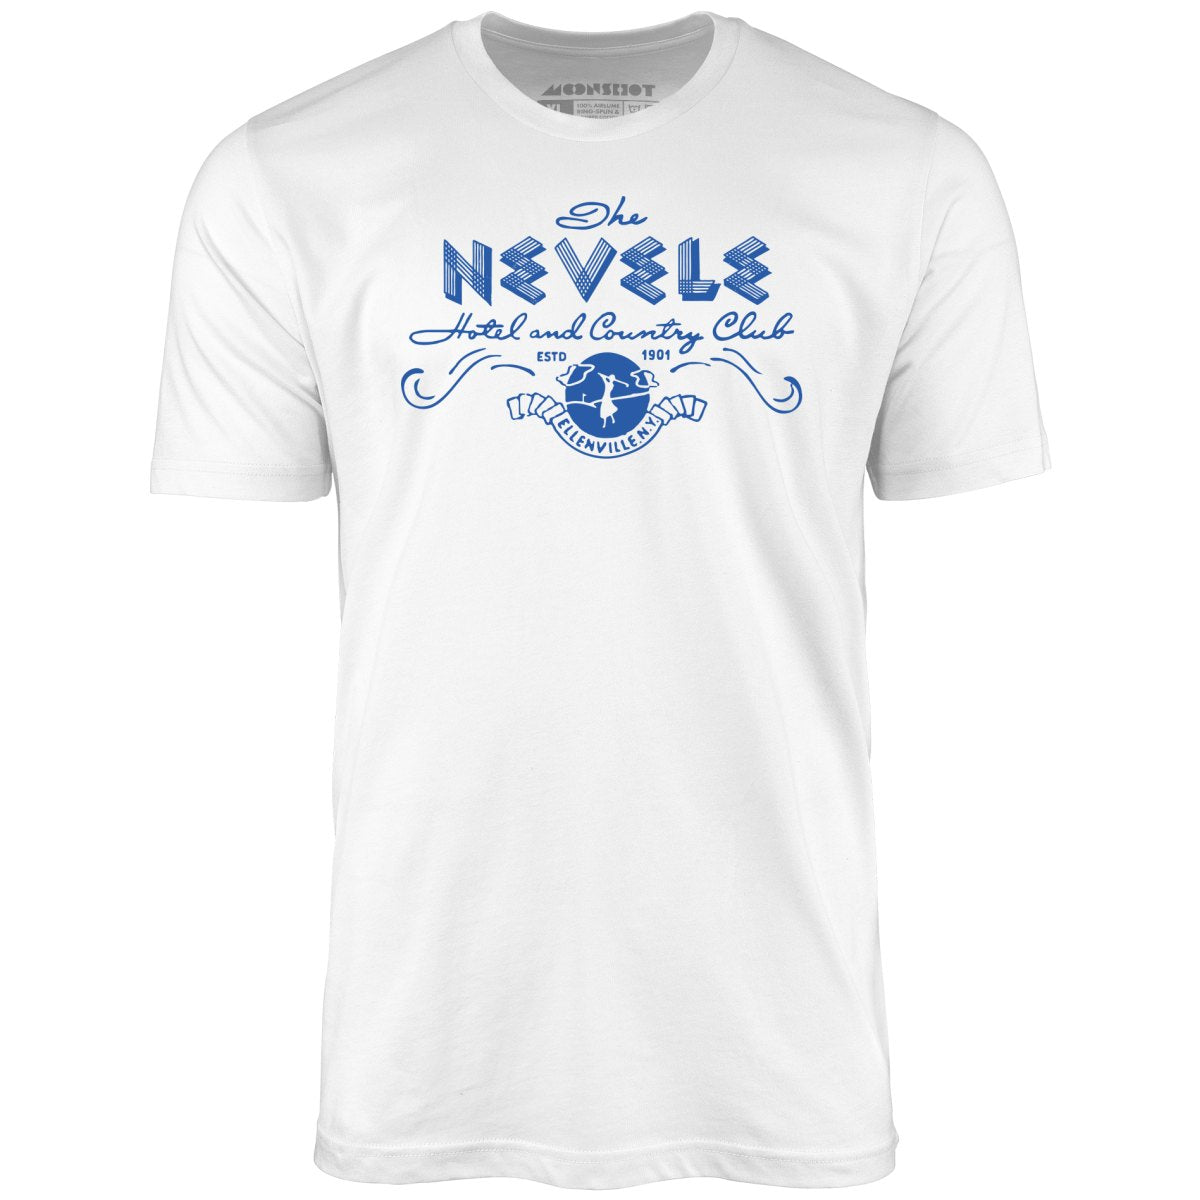 The Nevele Grand - Hotel & Country Club - Ellenville, NY - Unisex T-Shirt